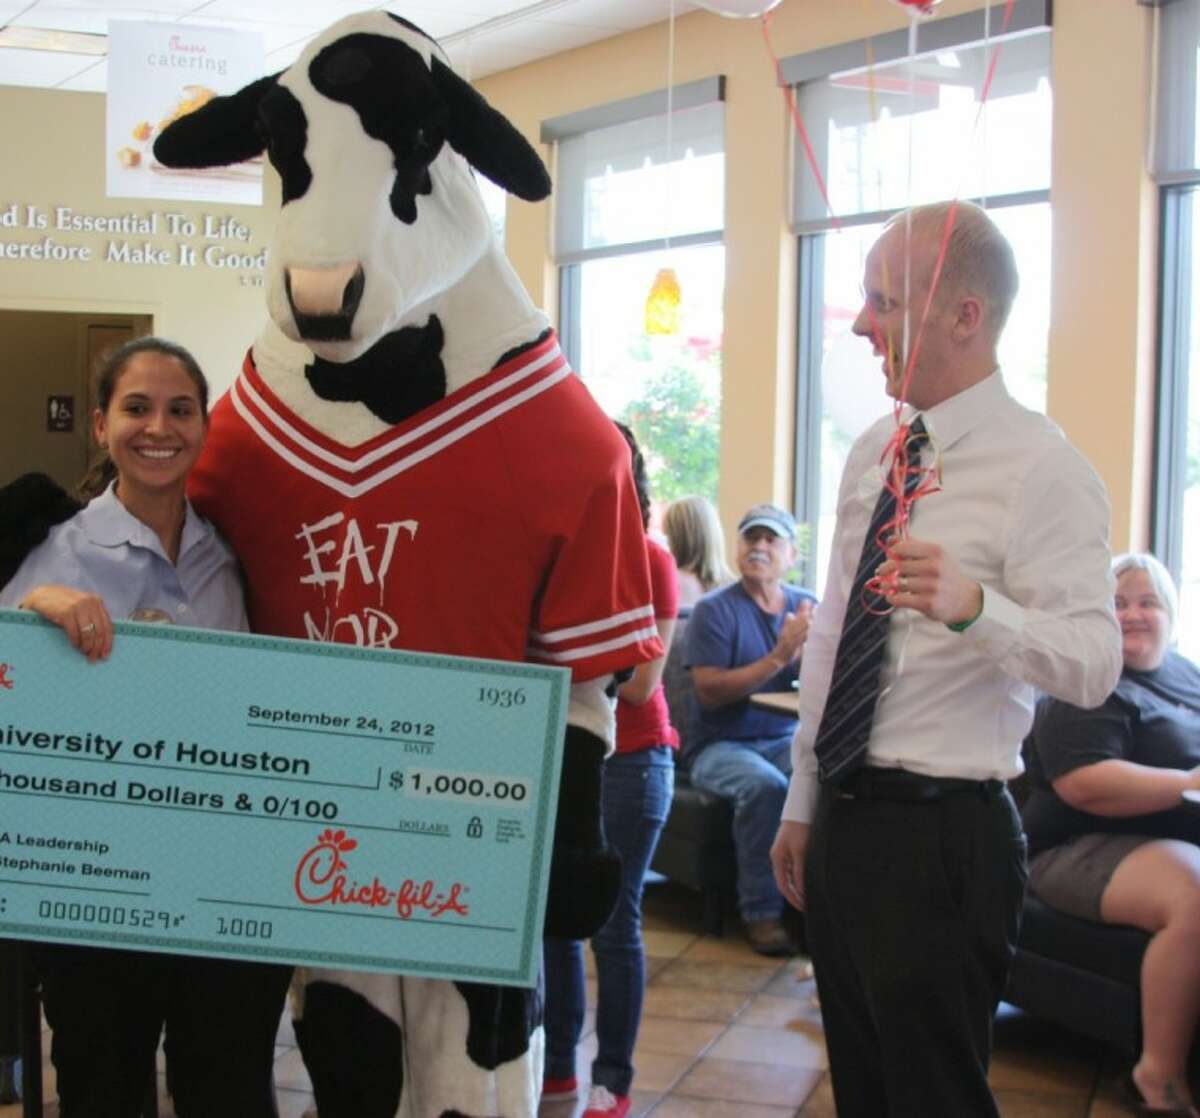 Pasadena resident Stephanie Beeman (Pictured left) was recently awarded a $1,000 Chick-fil-A Leadership Scholarship. She was nominated for the scholarship program by Luke Wilbanks, Operator of the Chick-fil-A located at 5104 Fairmont Parkway (pictured right). On Thursday (Oct. 4), Wilbanks a hosted a surprise awards ceremony at the restaurant and presented Beeman with a $1,000 scholarship check.